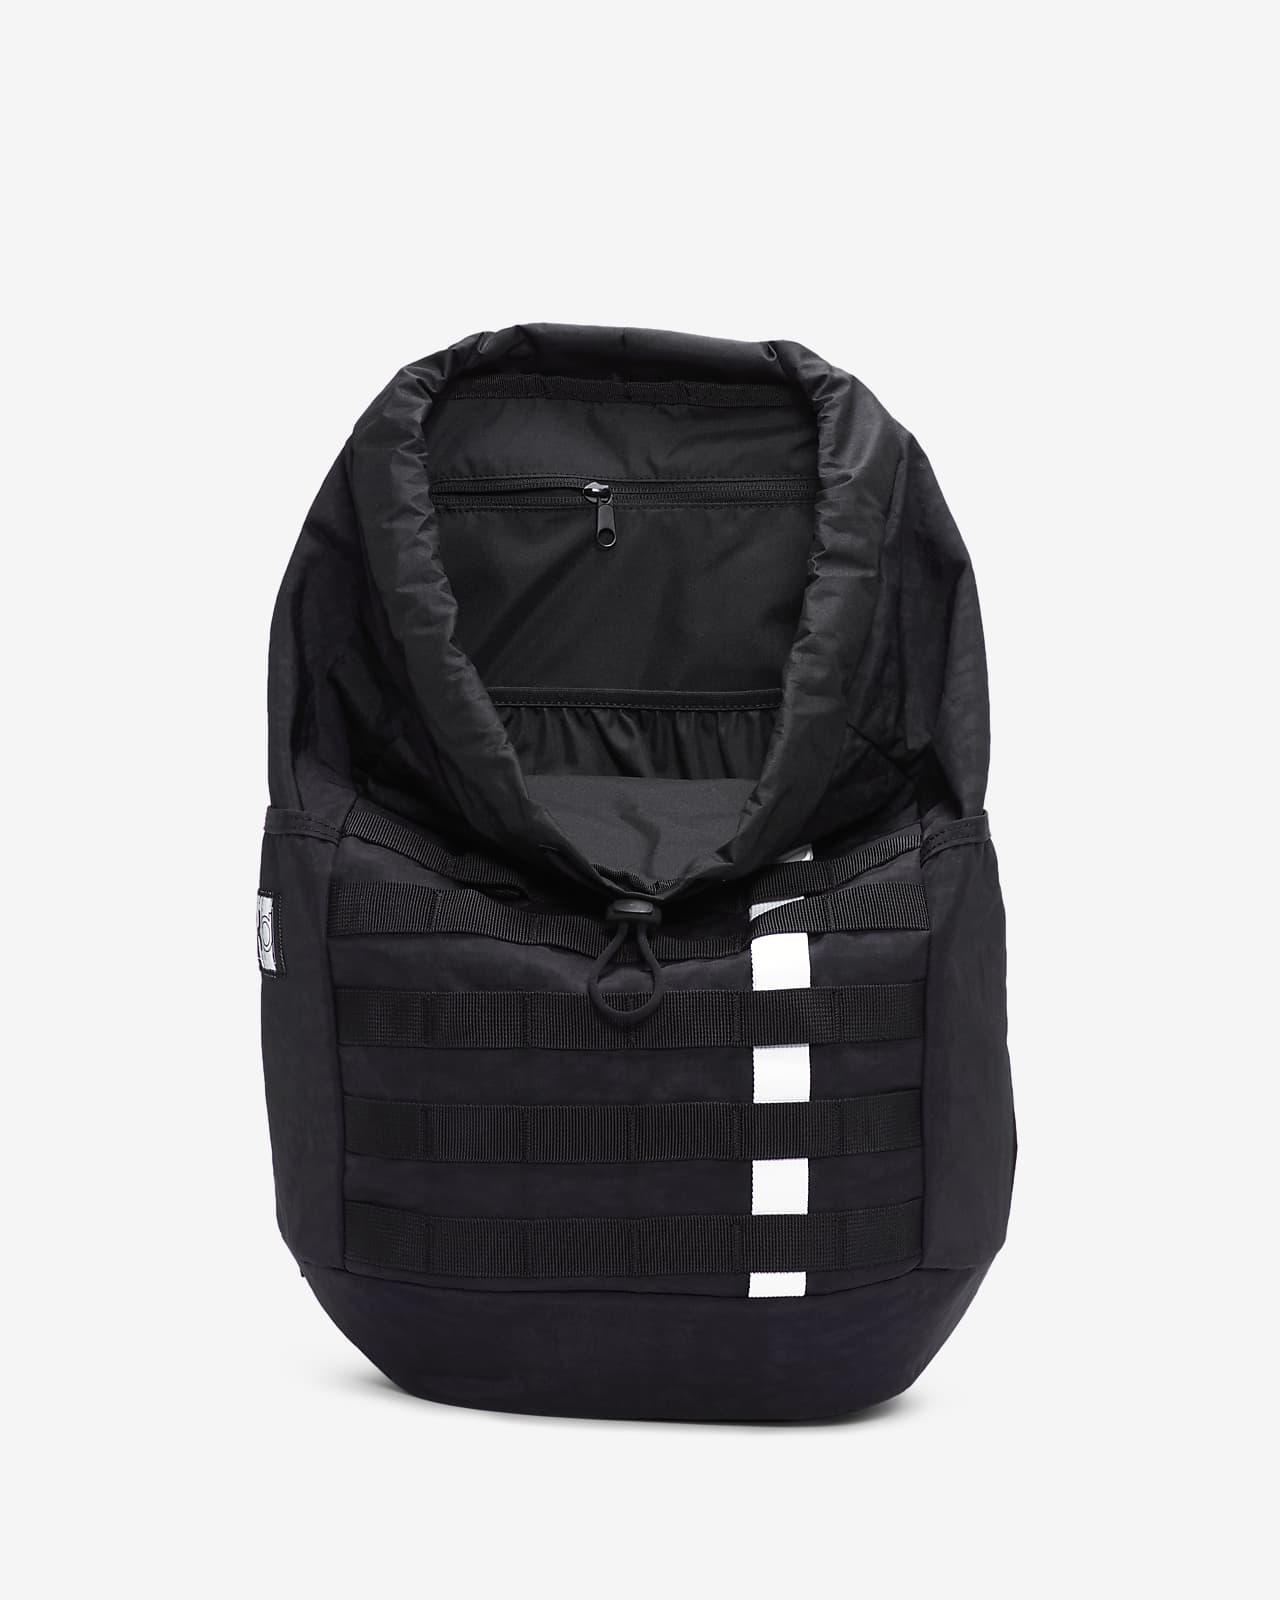 new kd backpack for sale